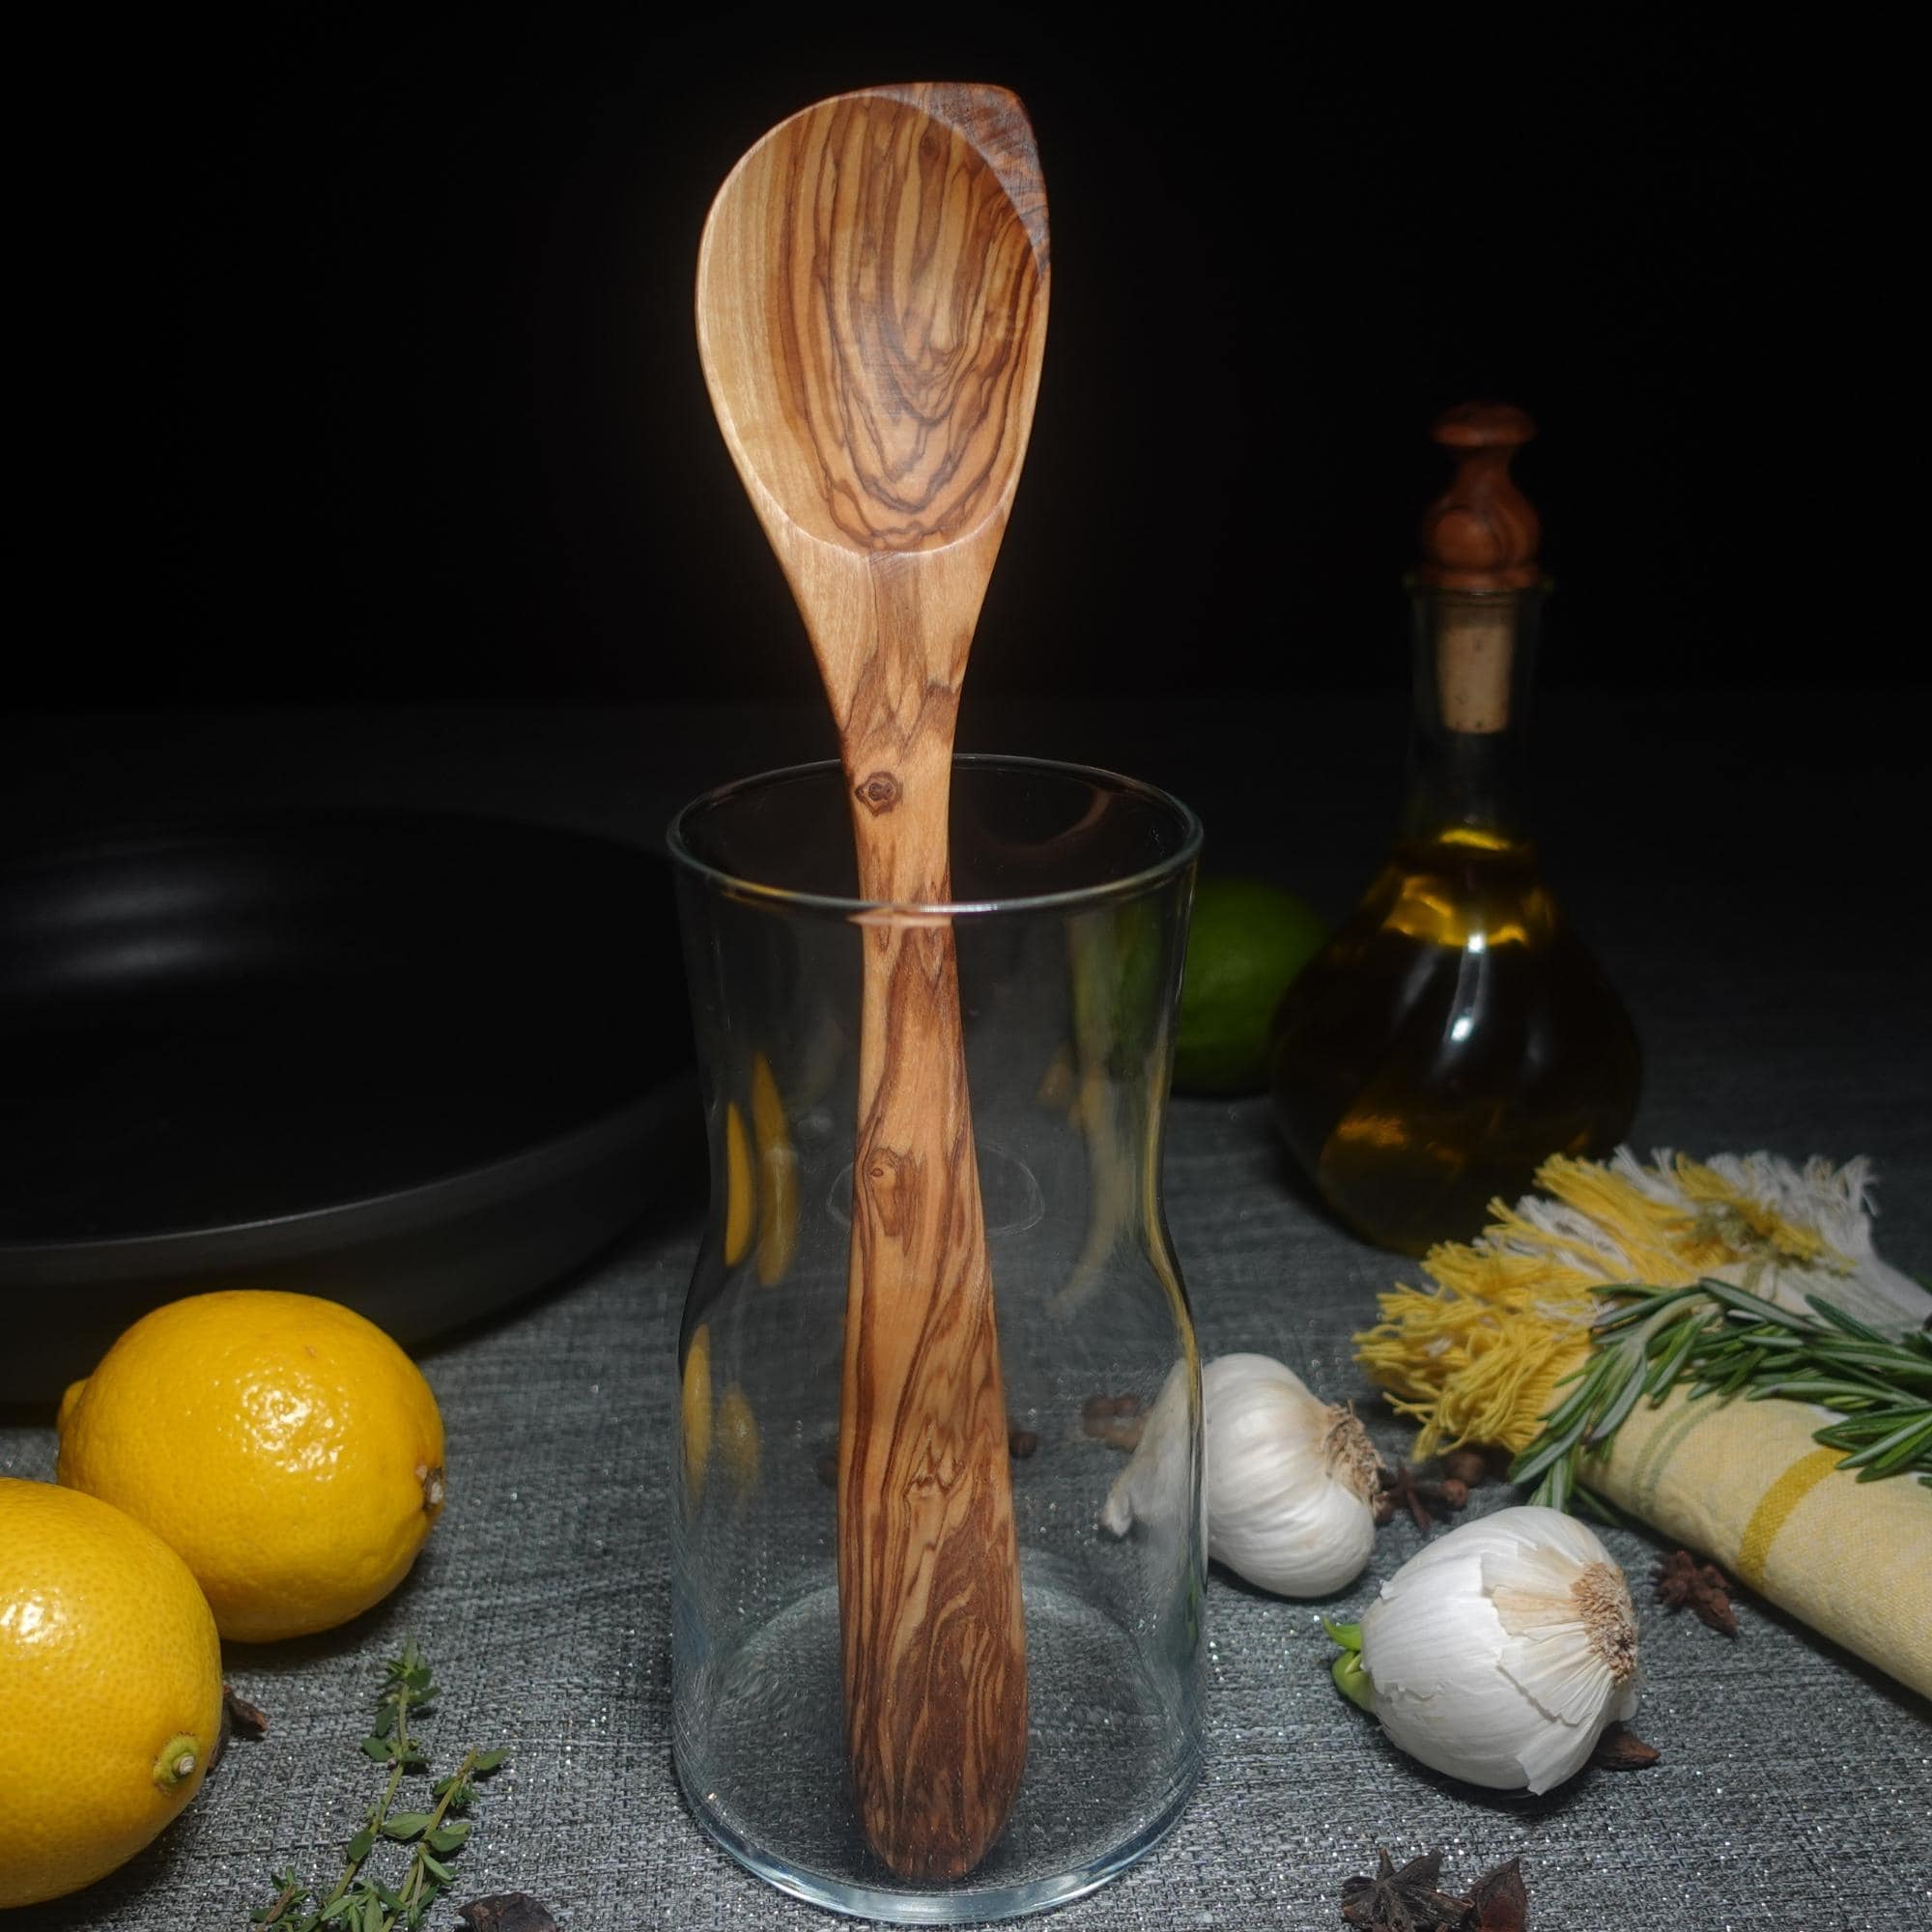 https://ak1.ostkcdn.com/images/products/is/images/direct/f5aa4855182cfe8a3daddb710802289bce170ec0/Wooden-Spoon-Olive-Wood-Pointed-Cooking-Spoon.jpg